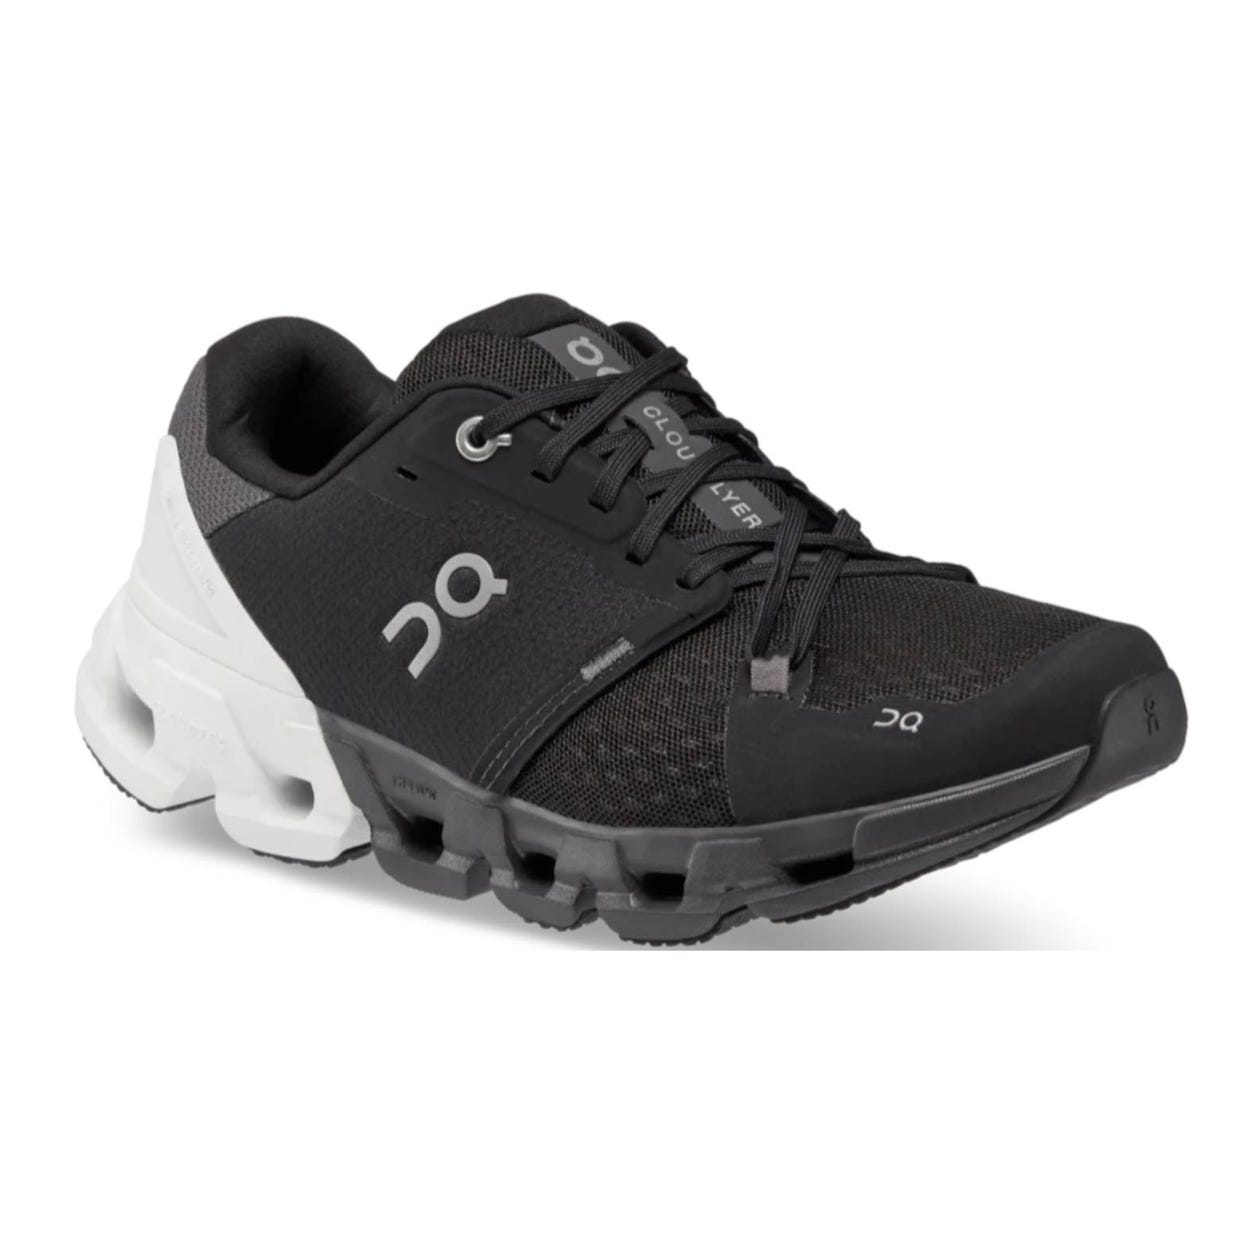 Black and white running shoe with a chunky sole and breathable mesh upper.